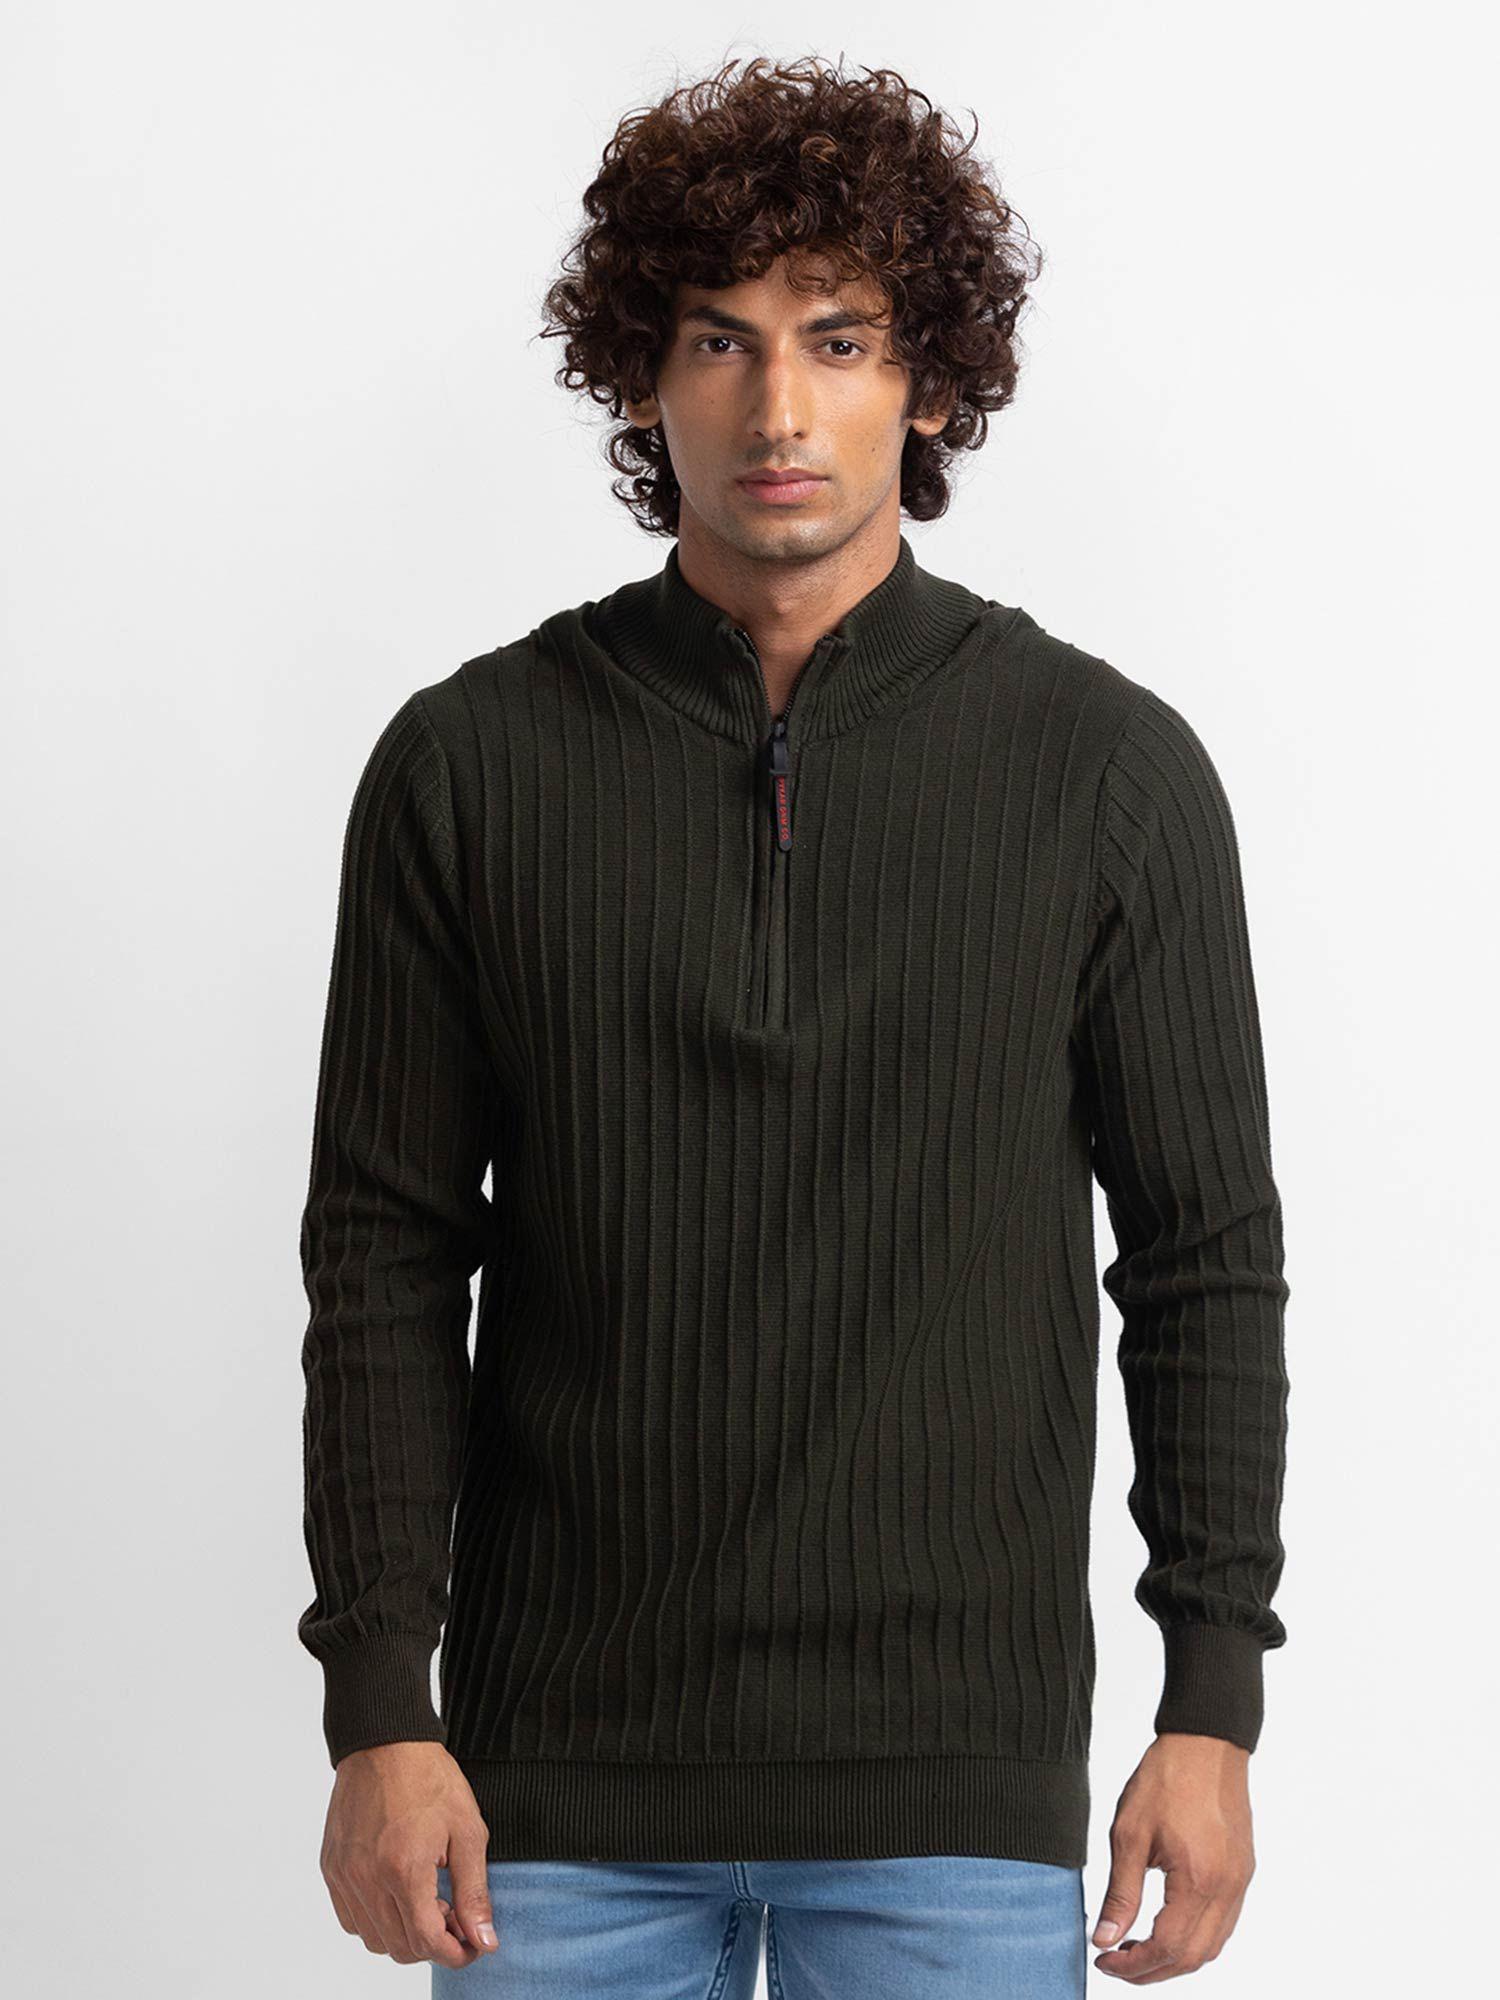 olive green cotton full sleeve casual sweater for men